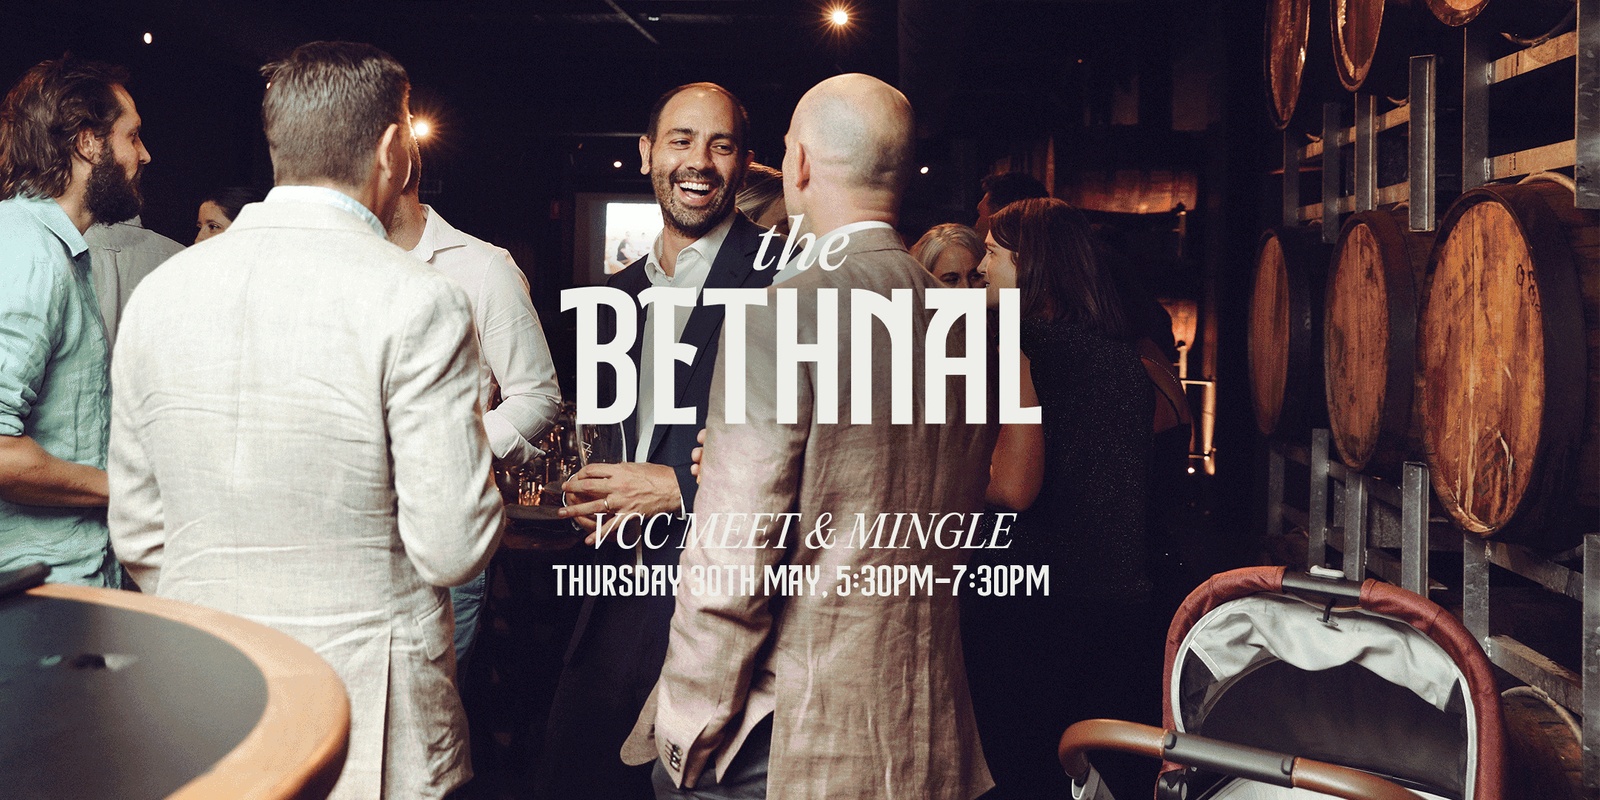 Banner image for VCC Meet & Mingle - The Bethnal